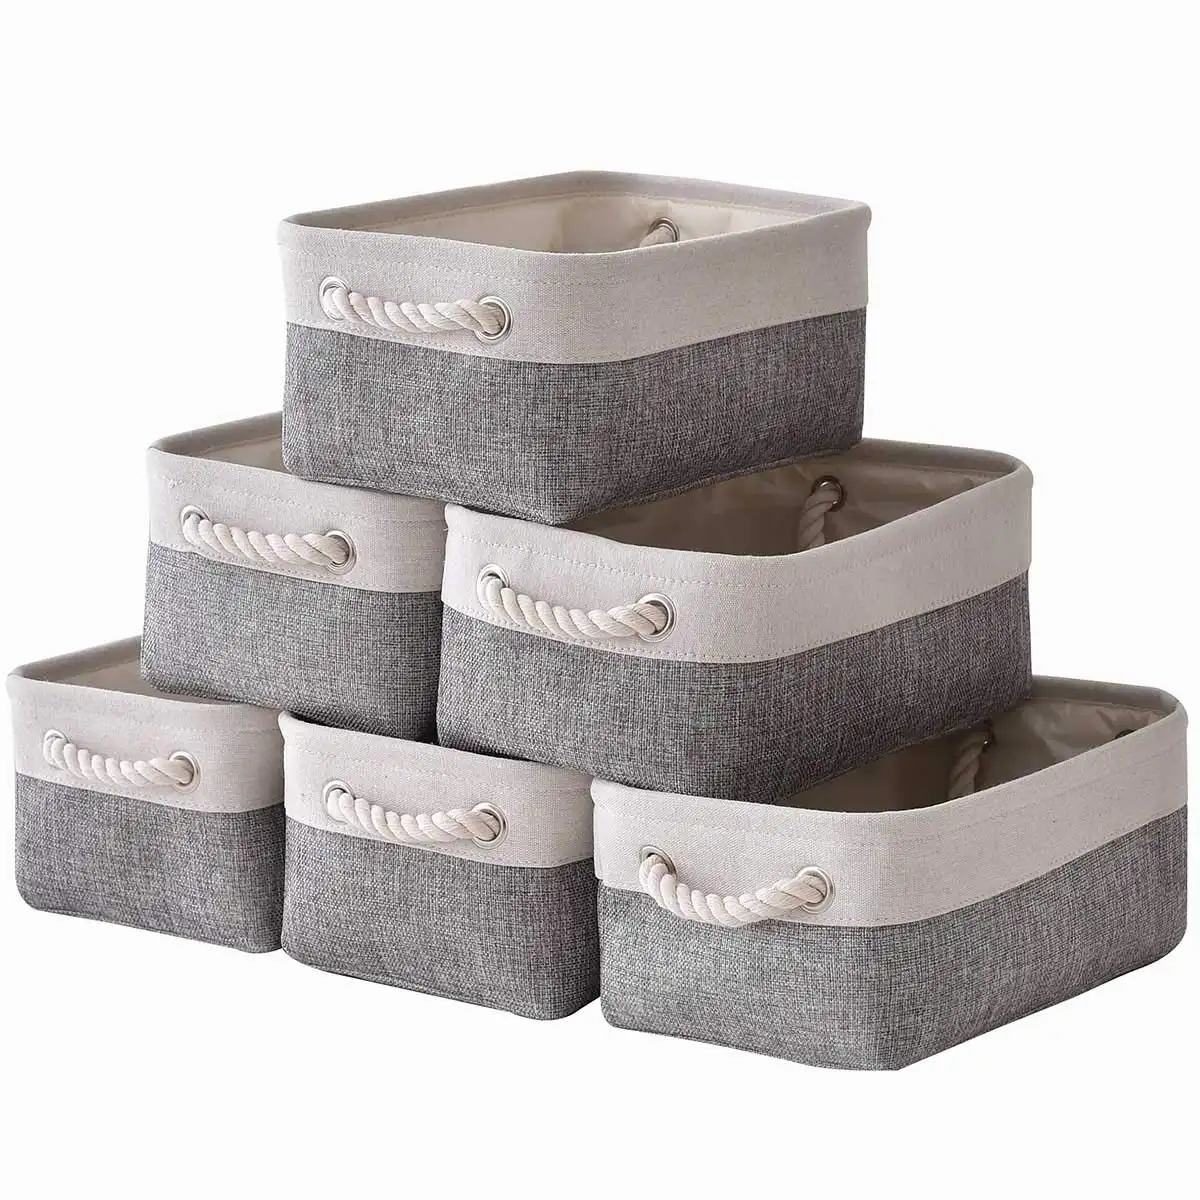 House Fabric Storage Bins Cubes Baskets Containers with Dual Plastic Handles for Home Closet Bedroom Drawers Organizers